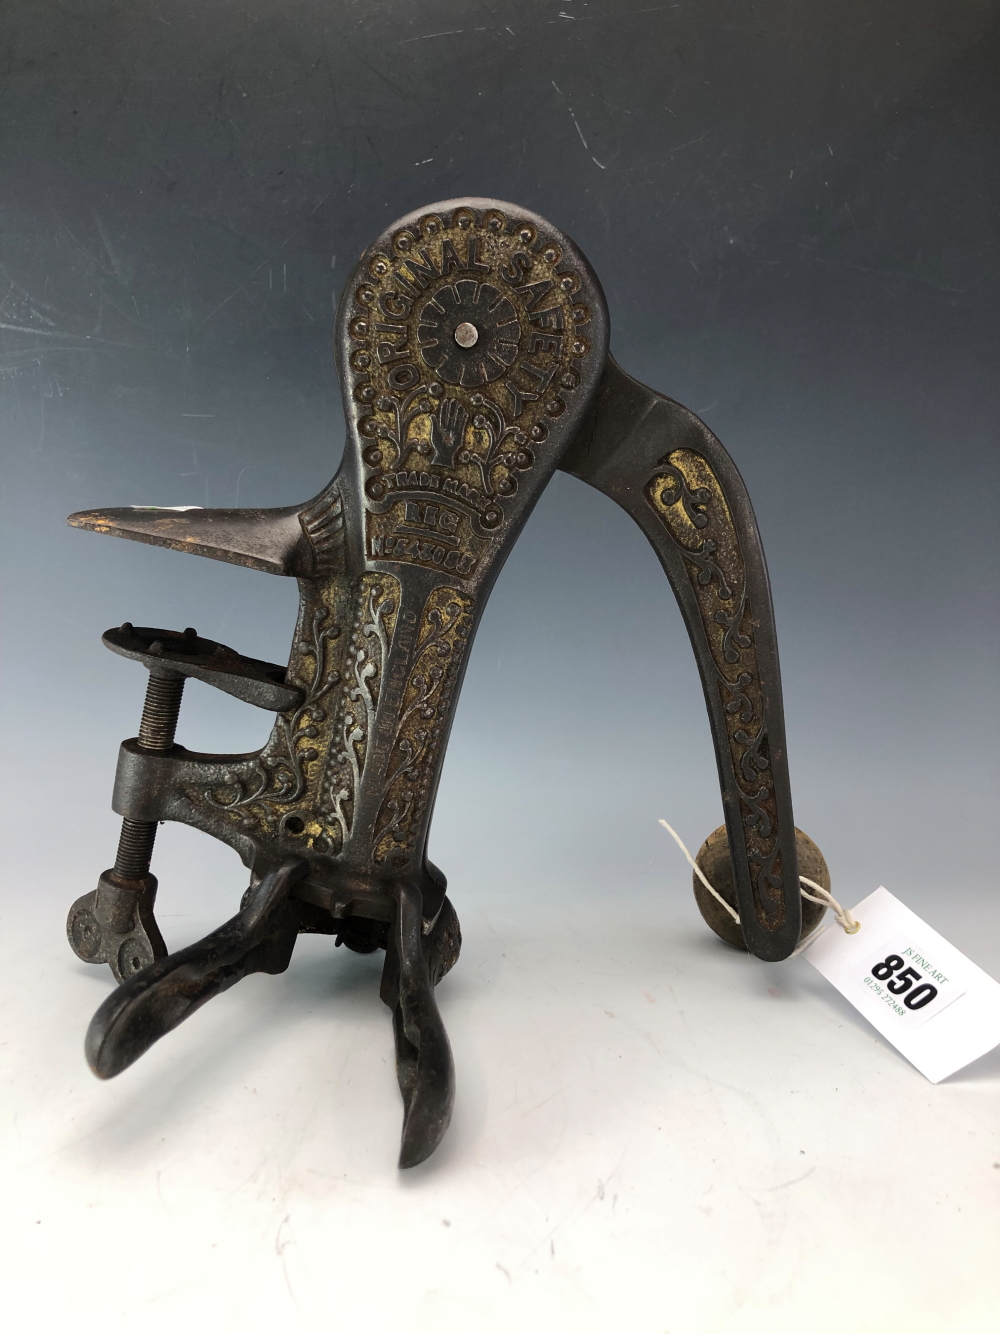 A VICTORIAN TABLE CLAMPING IRON CORKSCREW OPERATED BY A SUBSTANTIAL LEVER ARM